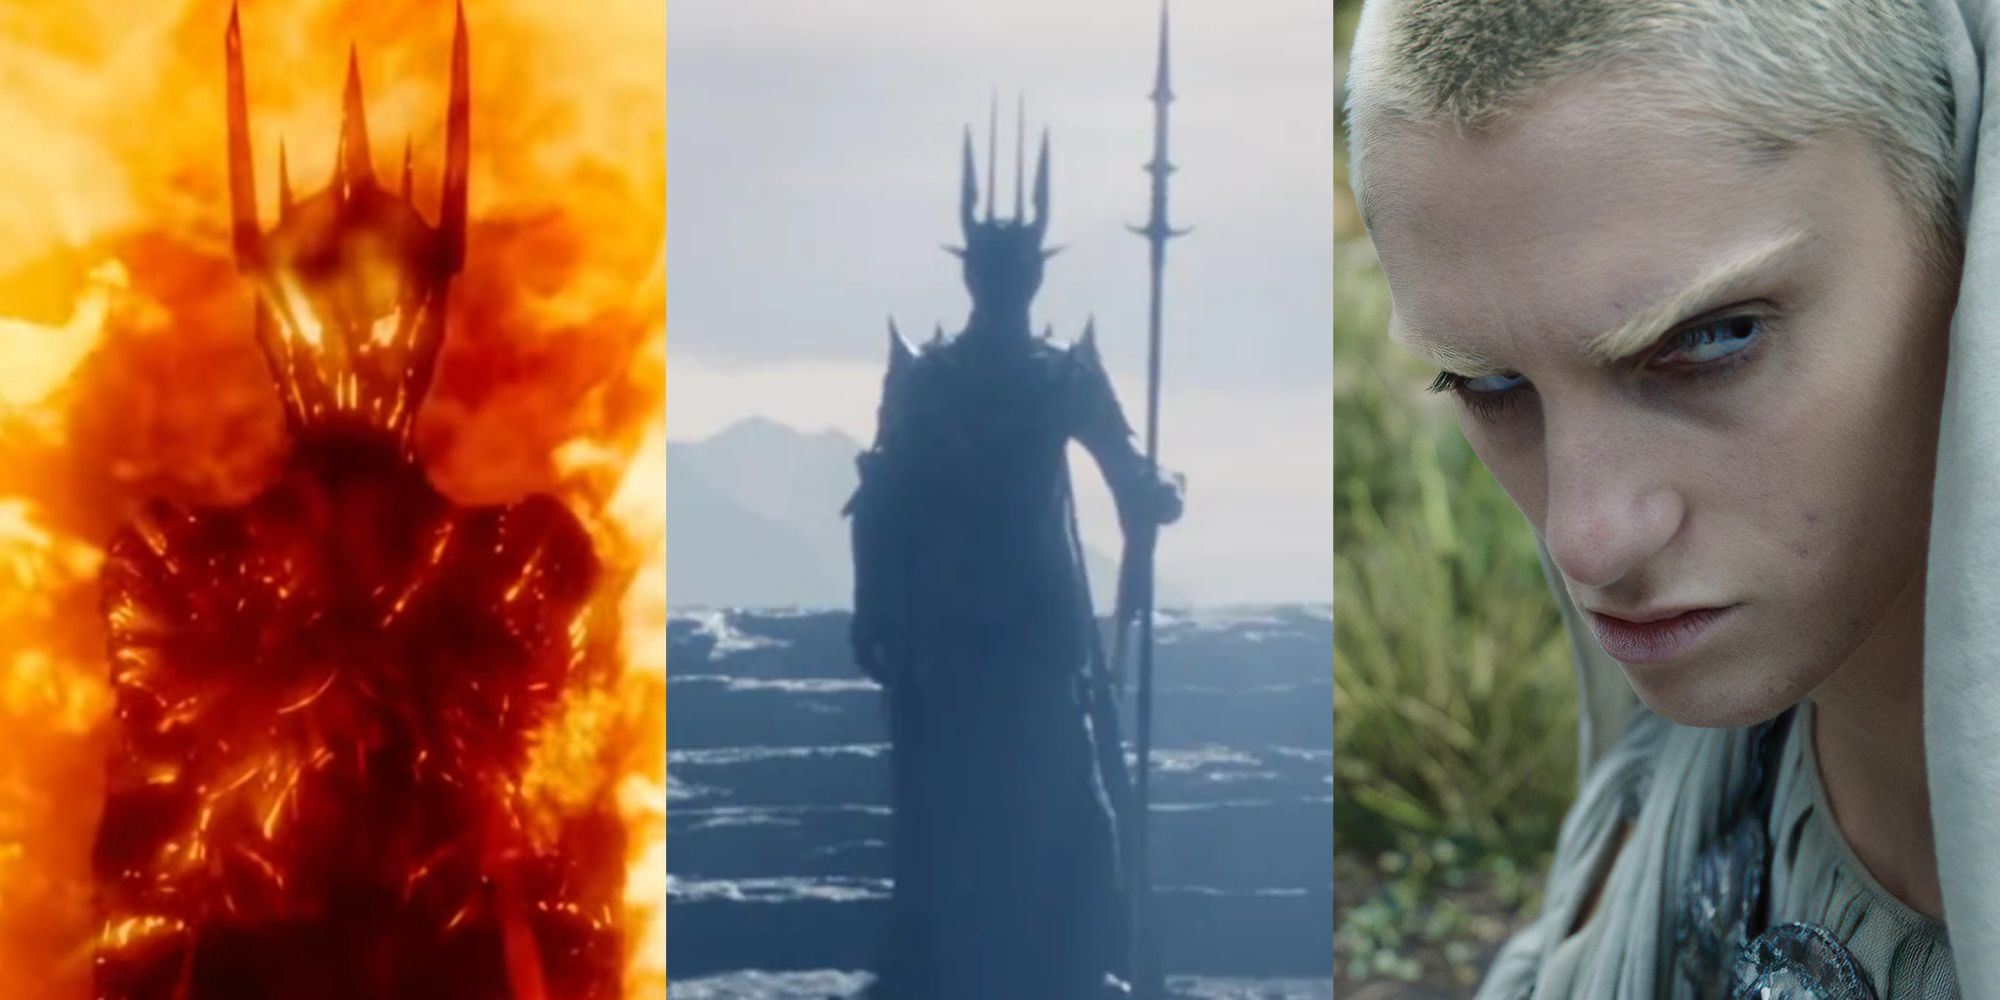 Split image of Sauron from the Hobbit movies and the Rings of Power show